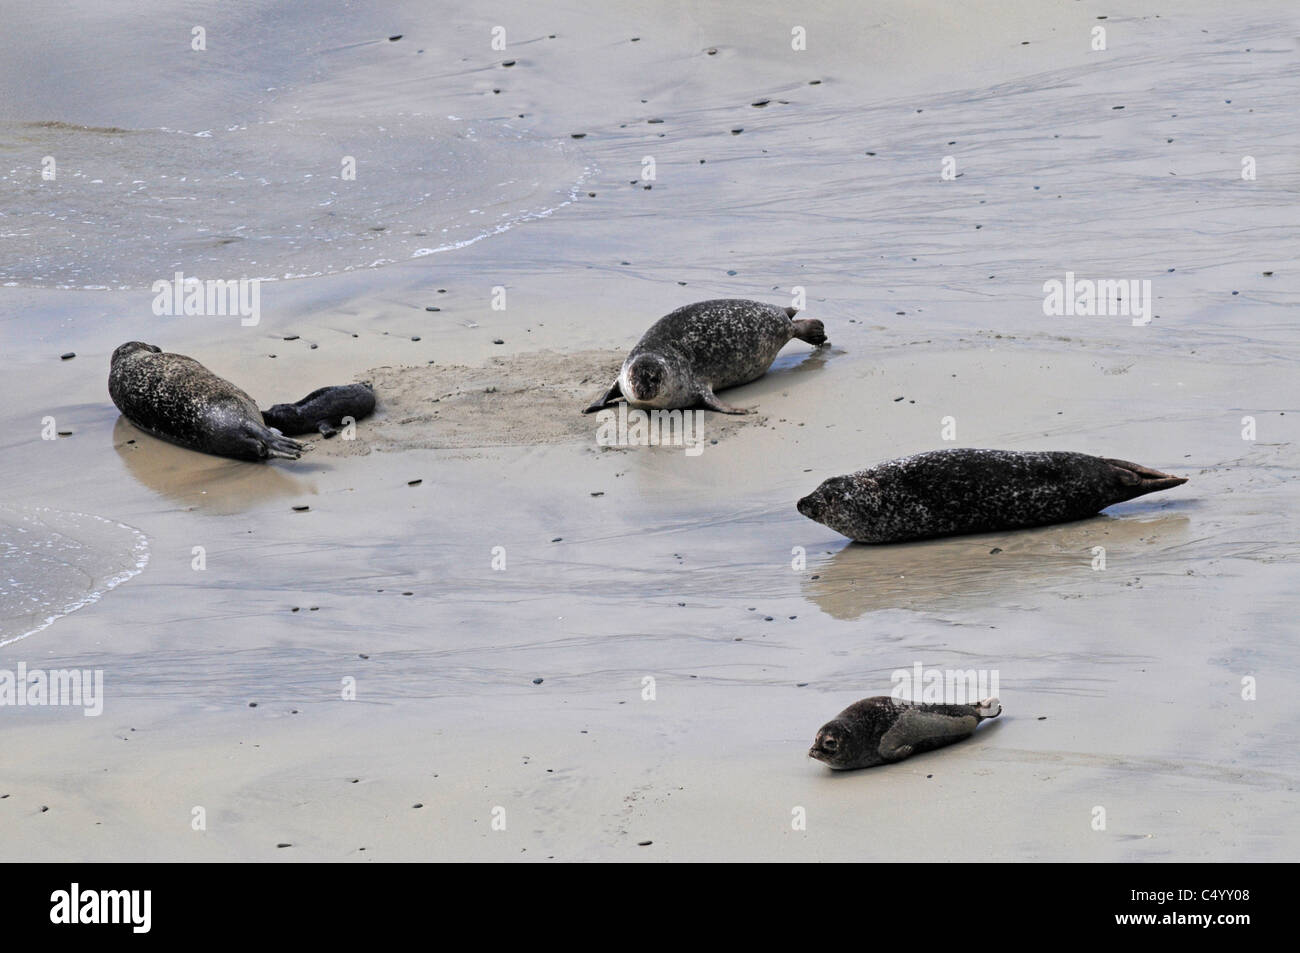 Common or Harbour seals and pups on the Bay of Scousburgh beach on the Shetland Isles. Scotland SCO 7373 Stock Photo